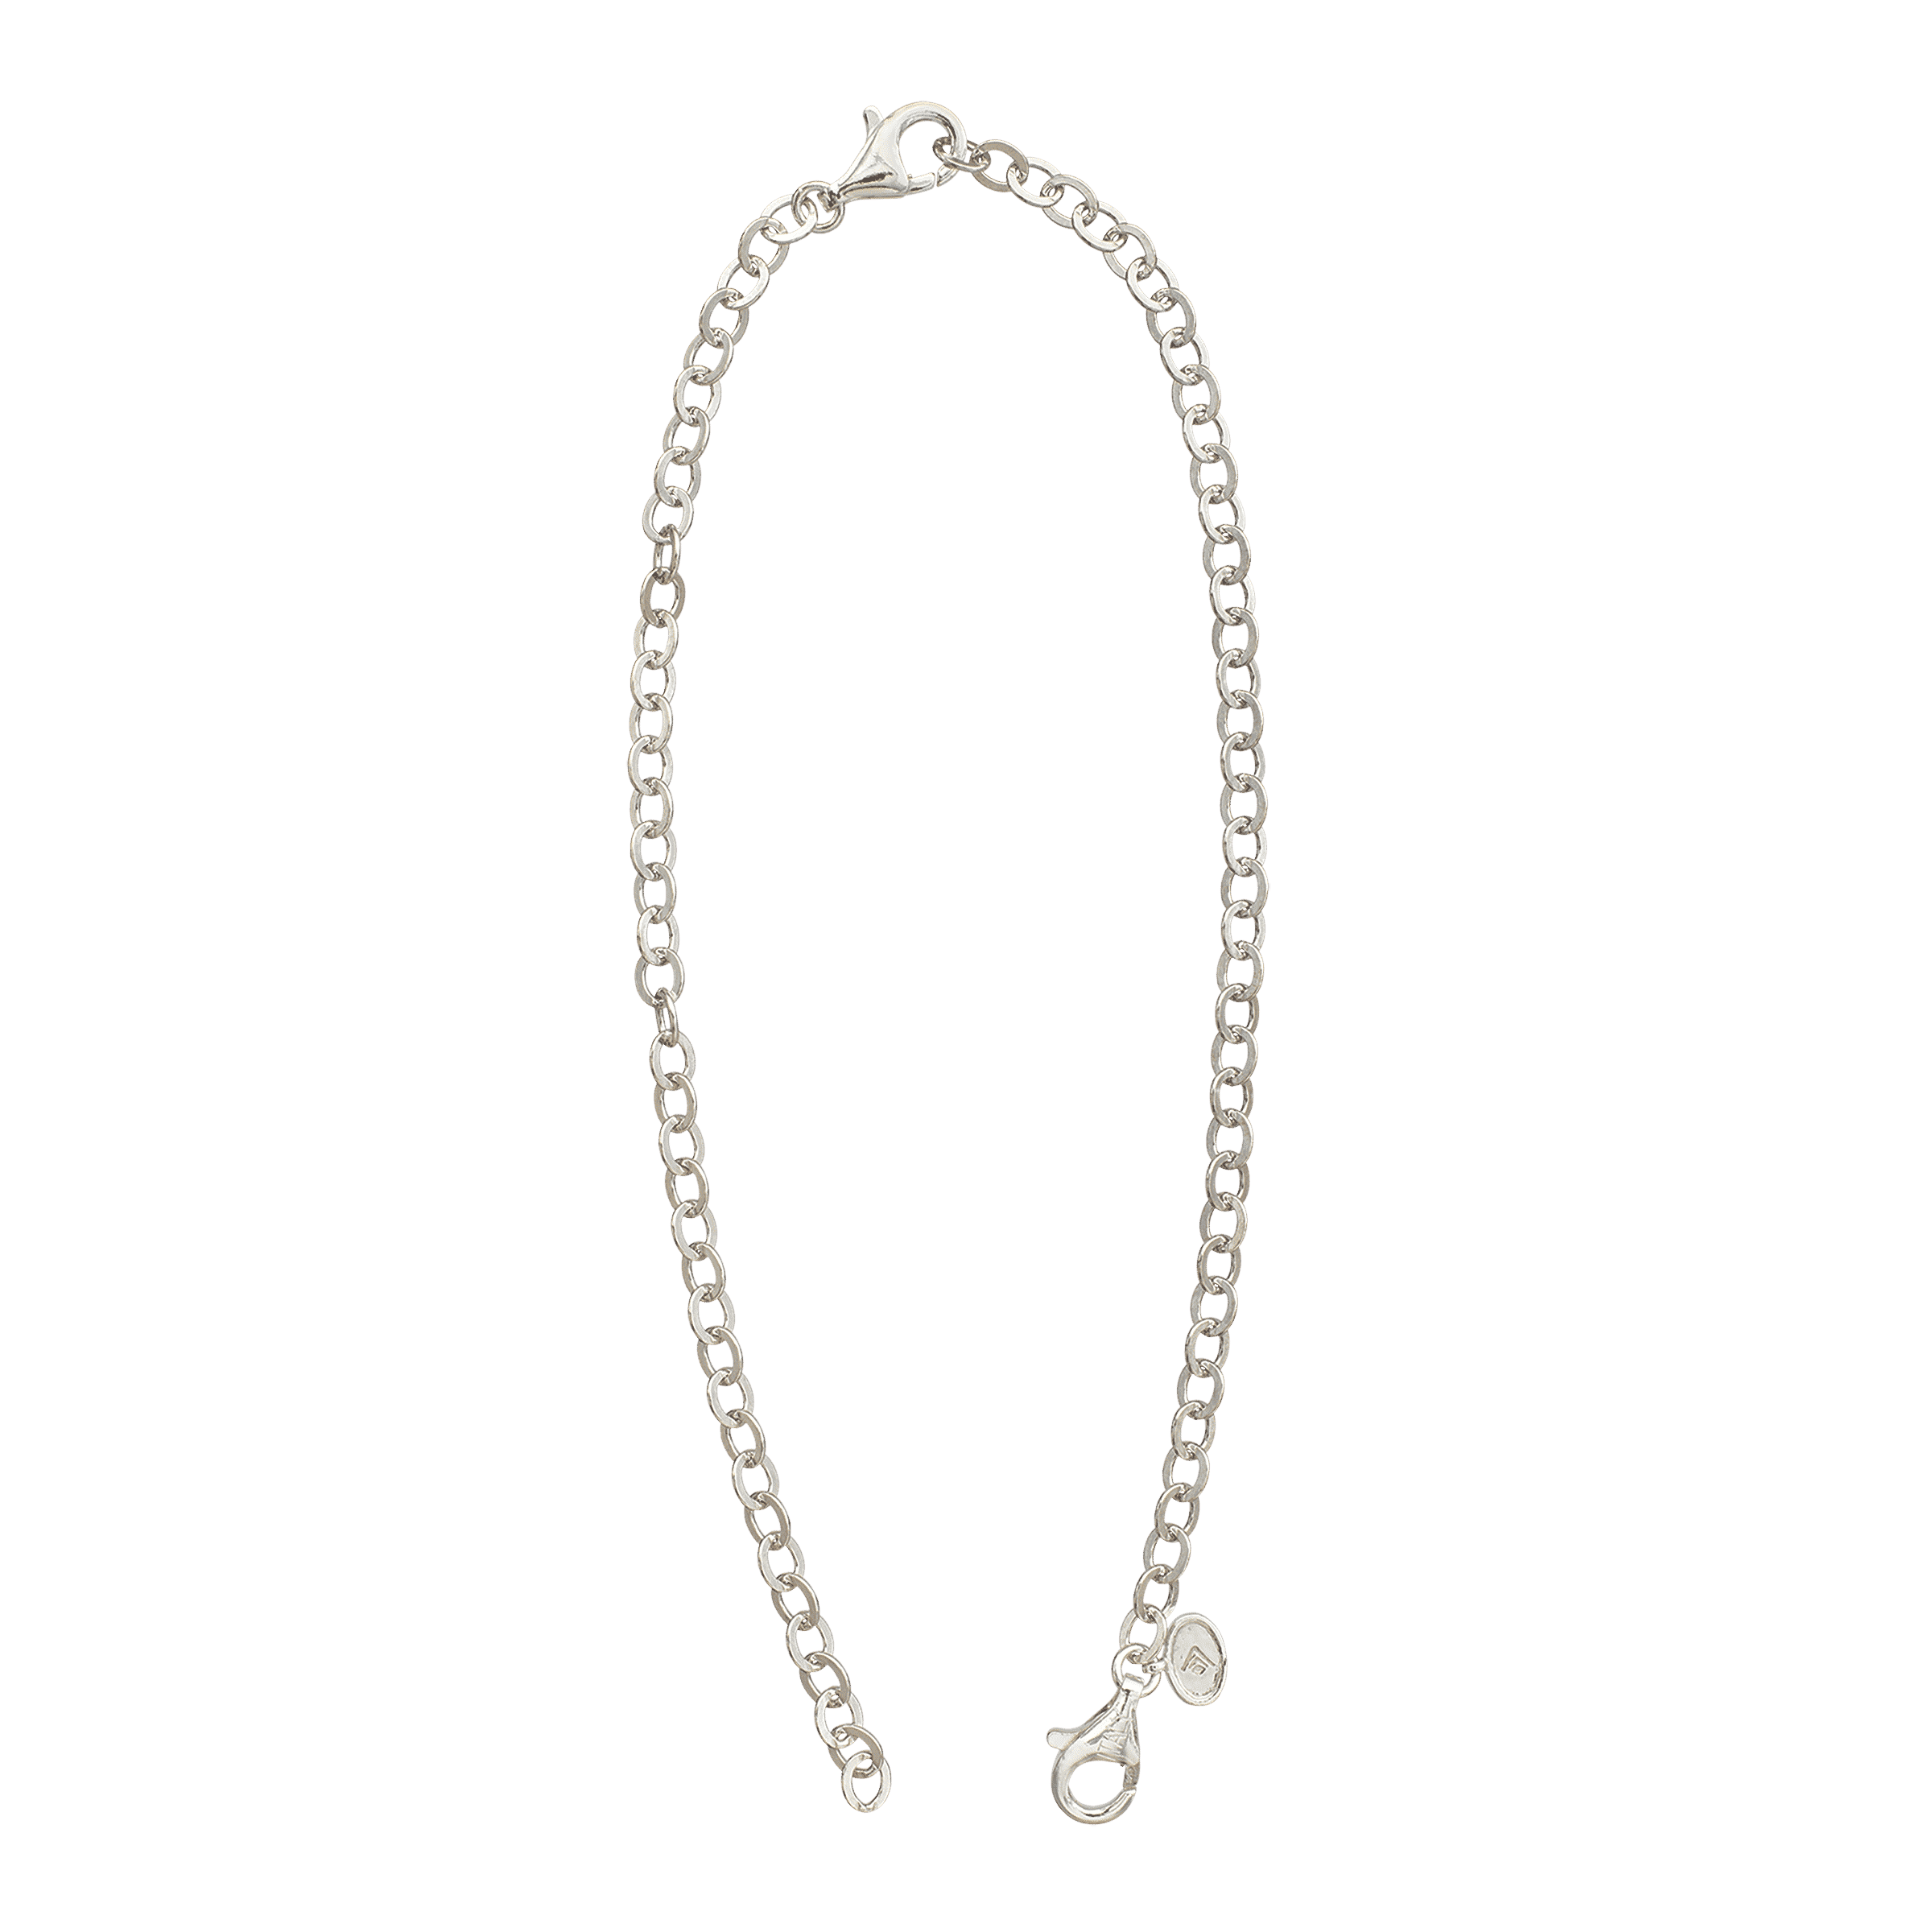 Necklace Extenders, Silver Plated Chain Extenders For Necklaces